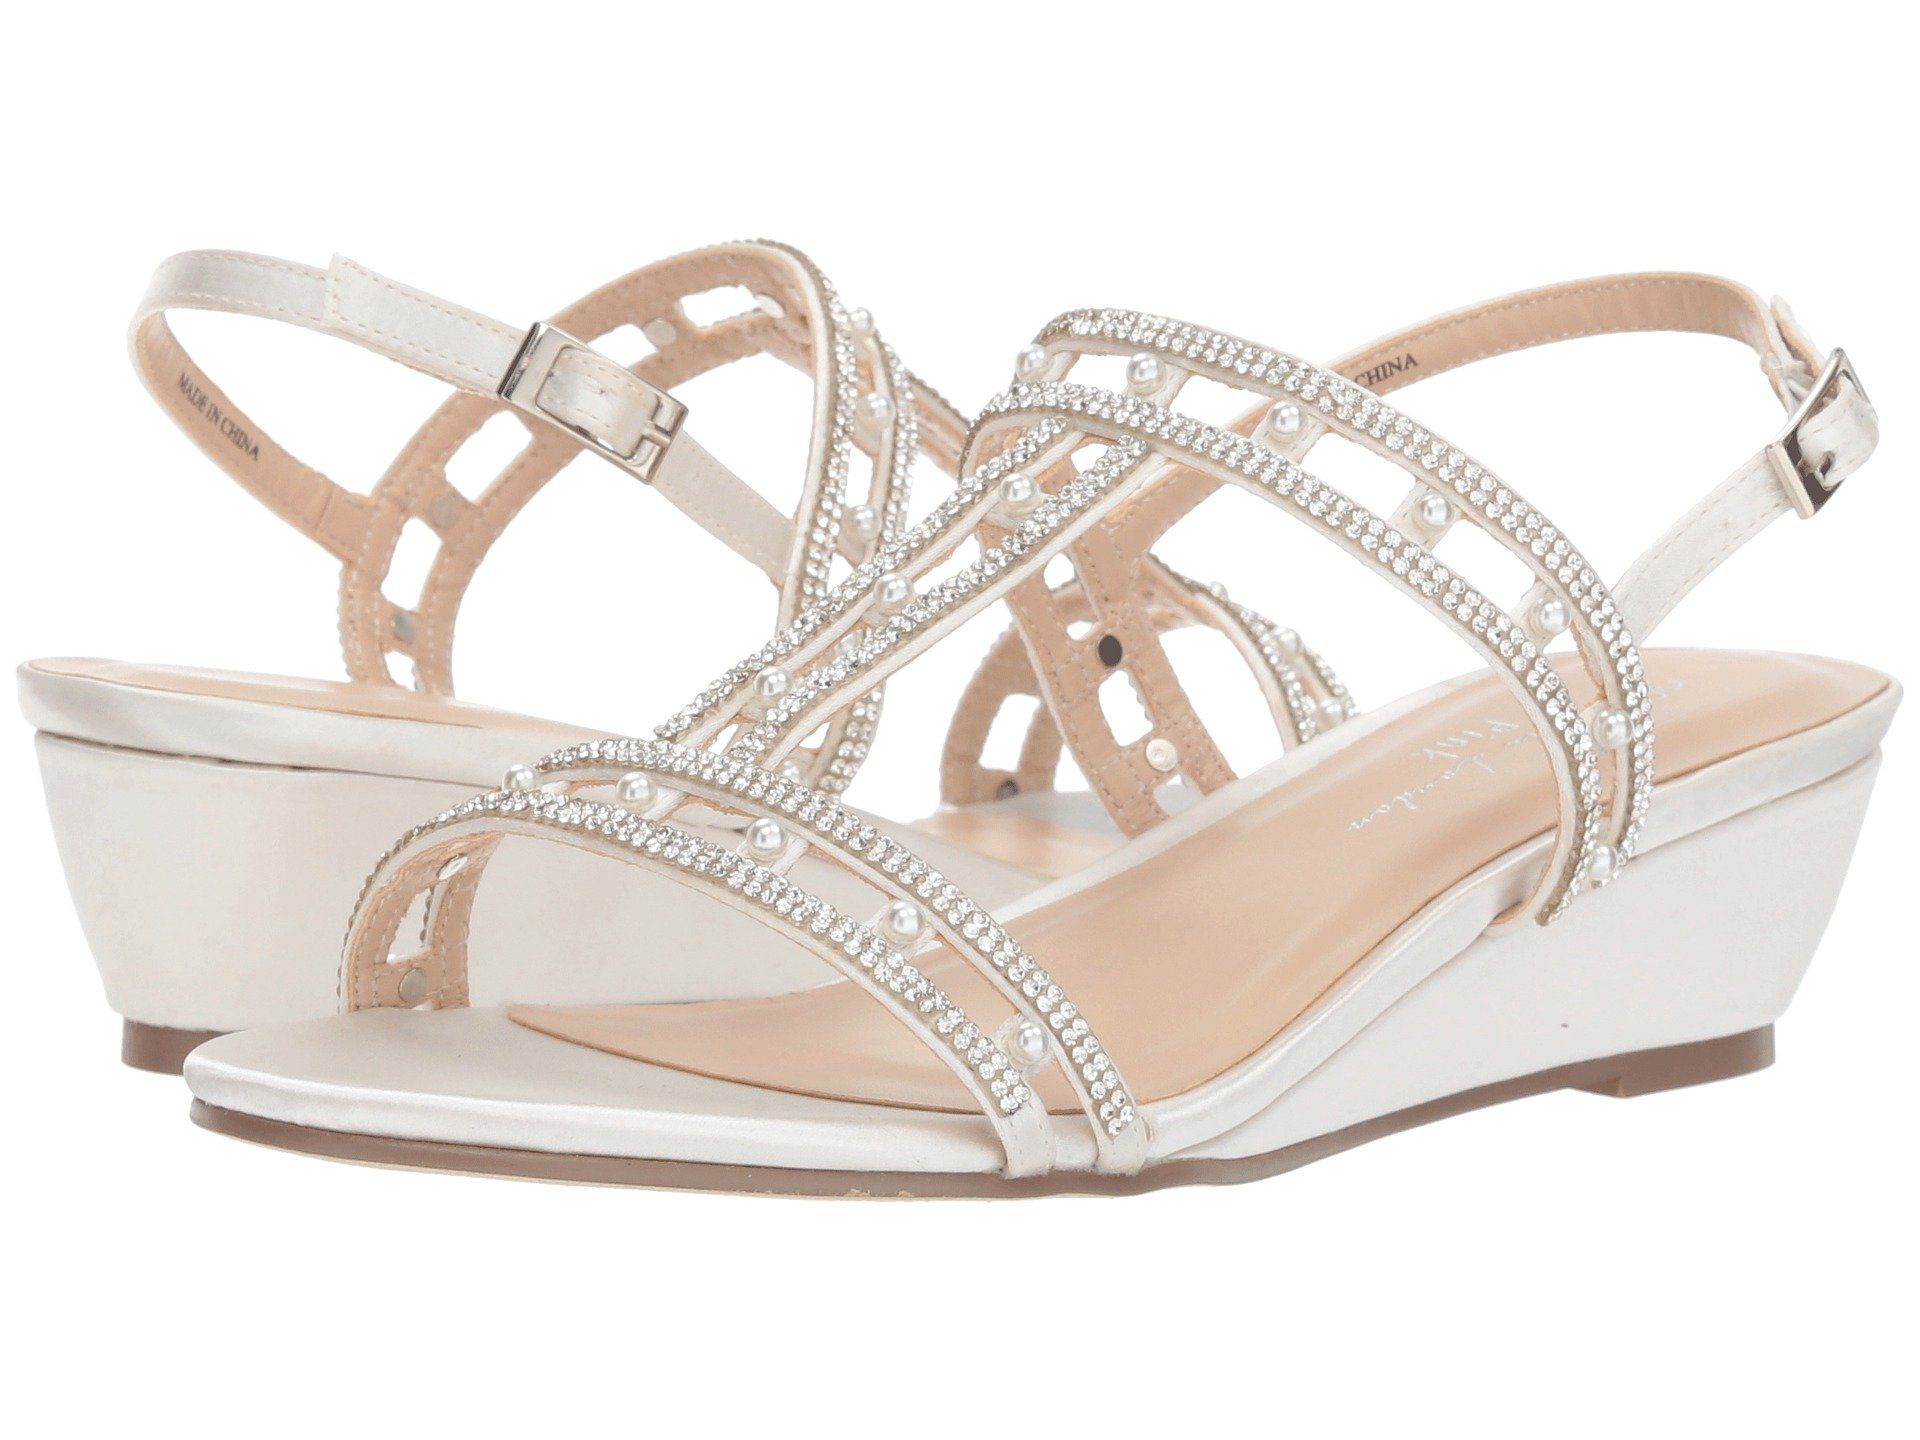 24 Chic Beach Wedding Shoes Sandals And Wedges For Brides In 2019